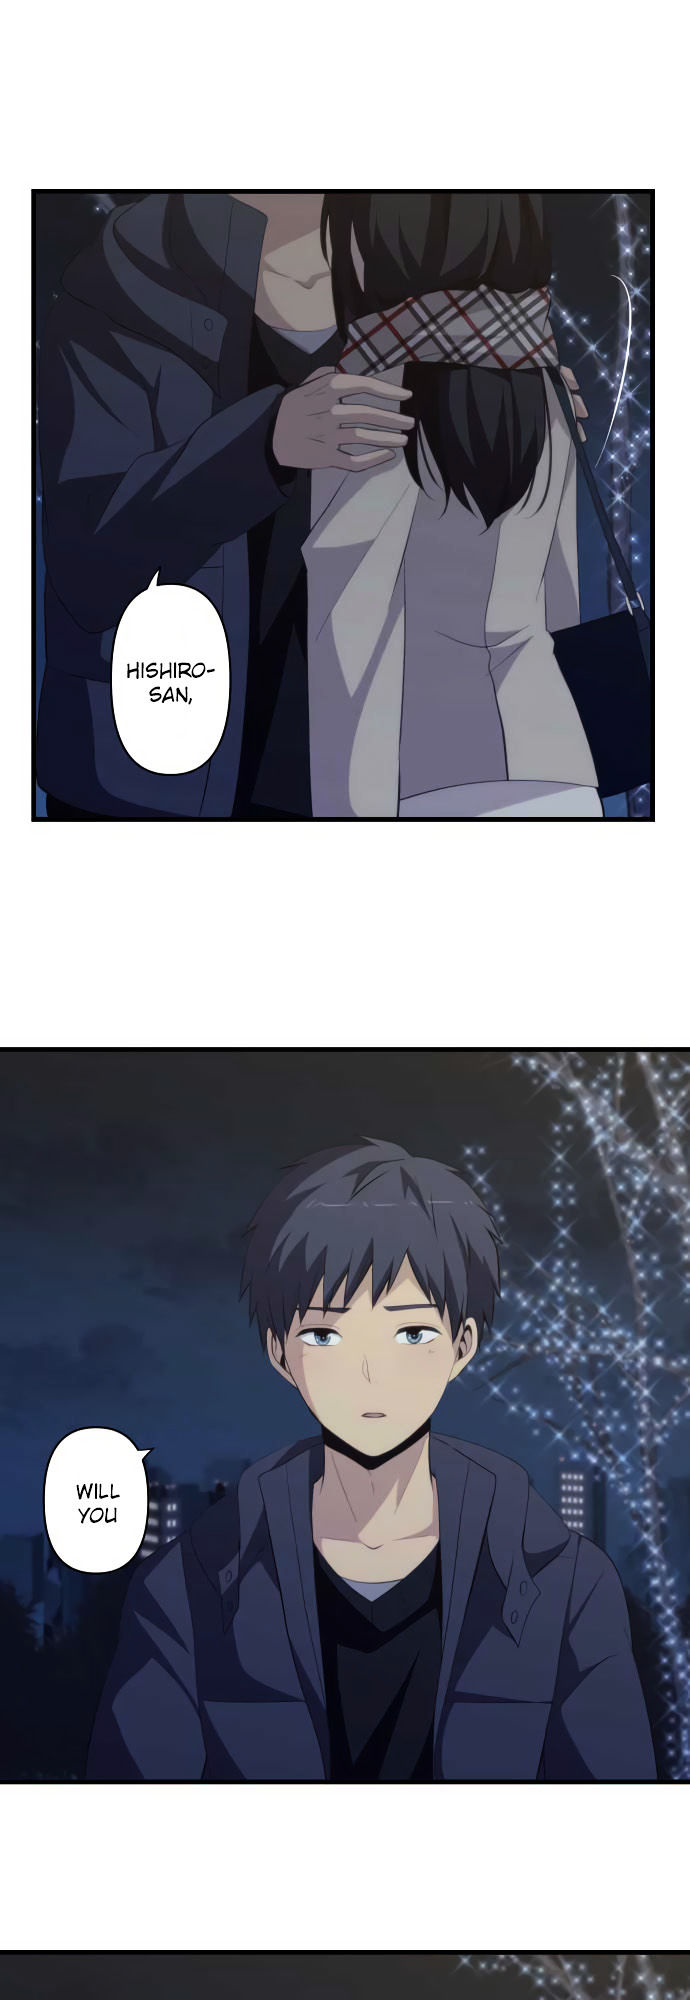 Relife 198 17